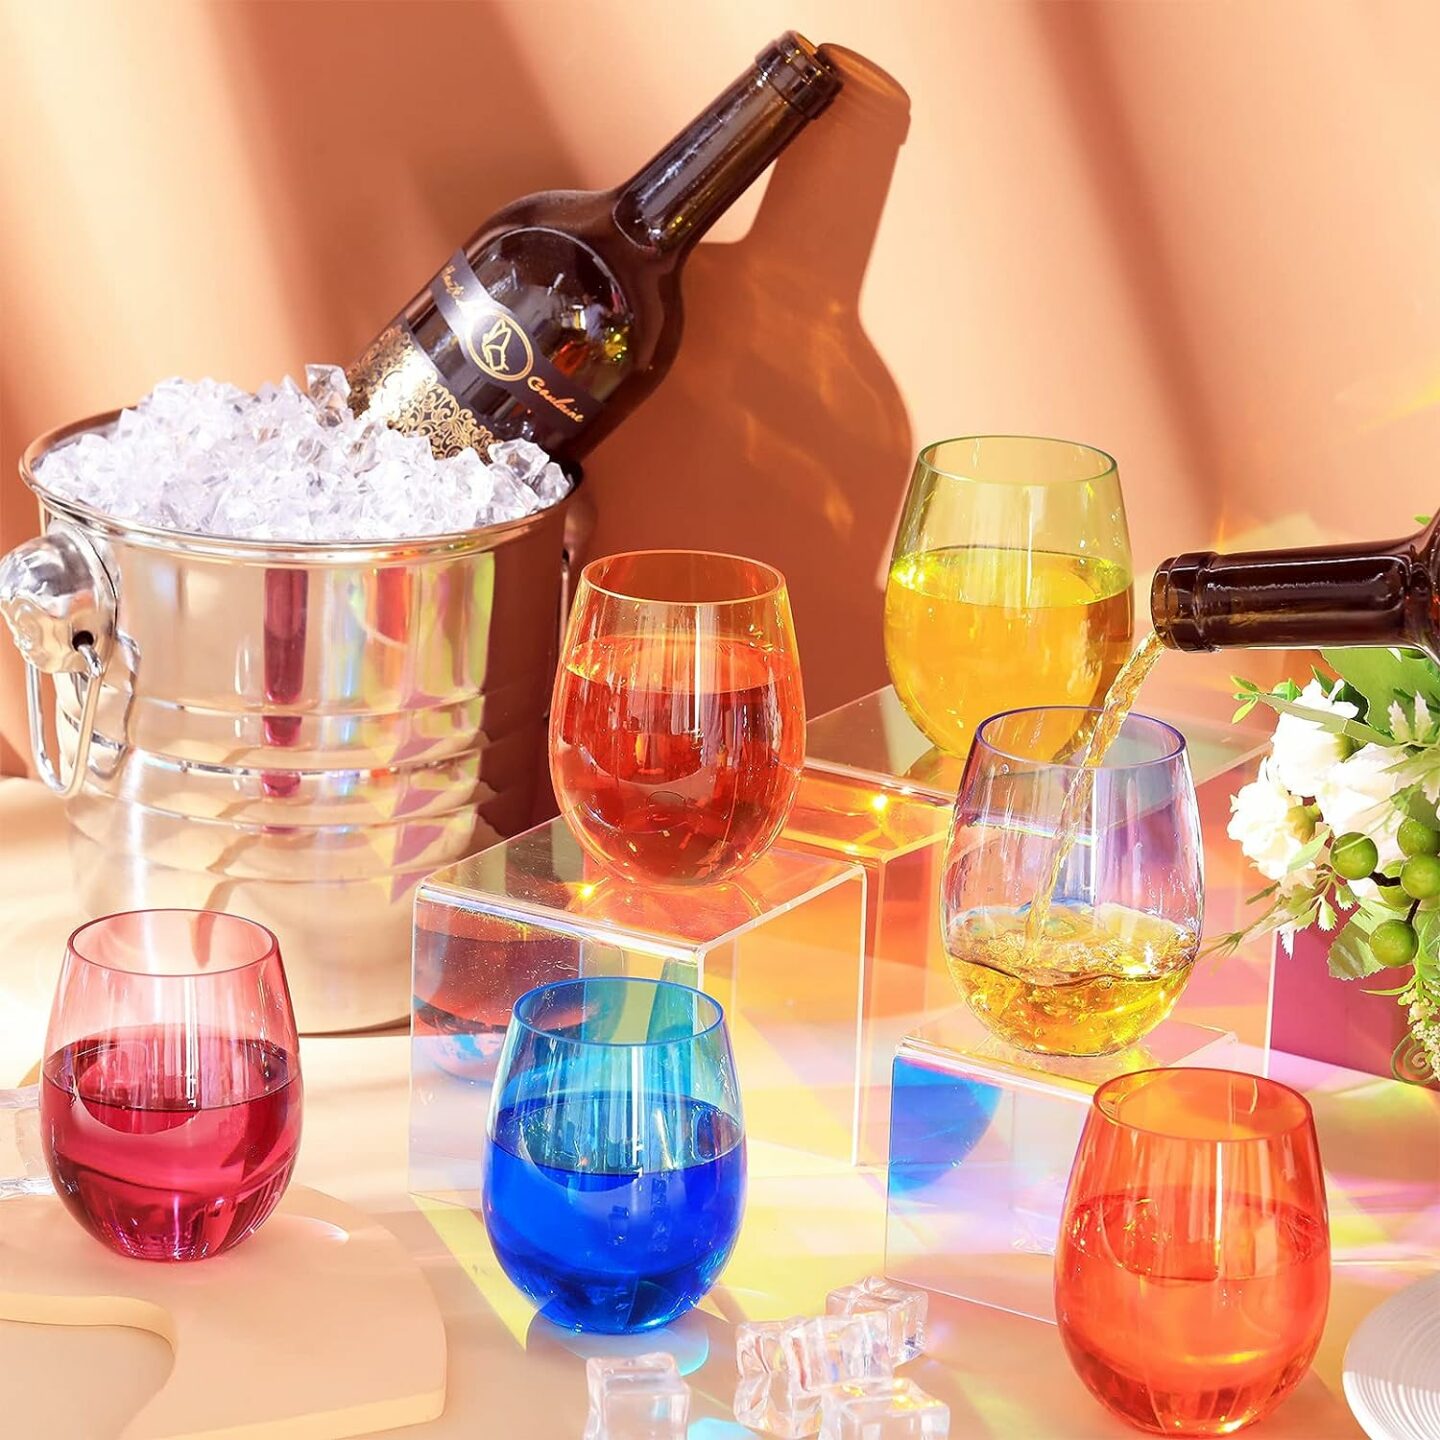 Display of colorful stemless wine glasses on peach tabletop